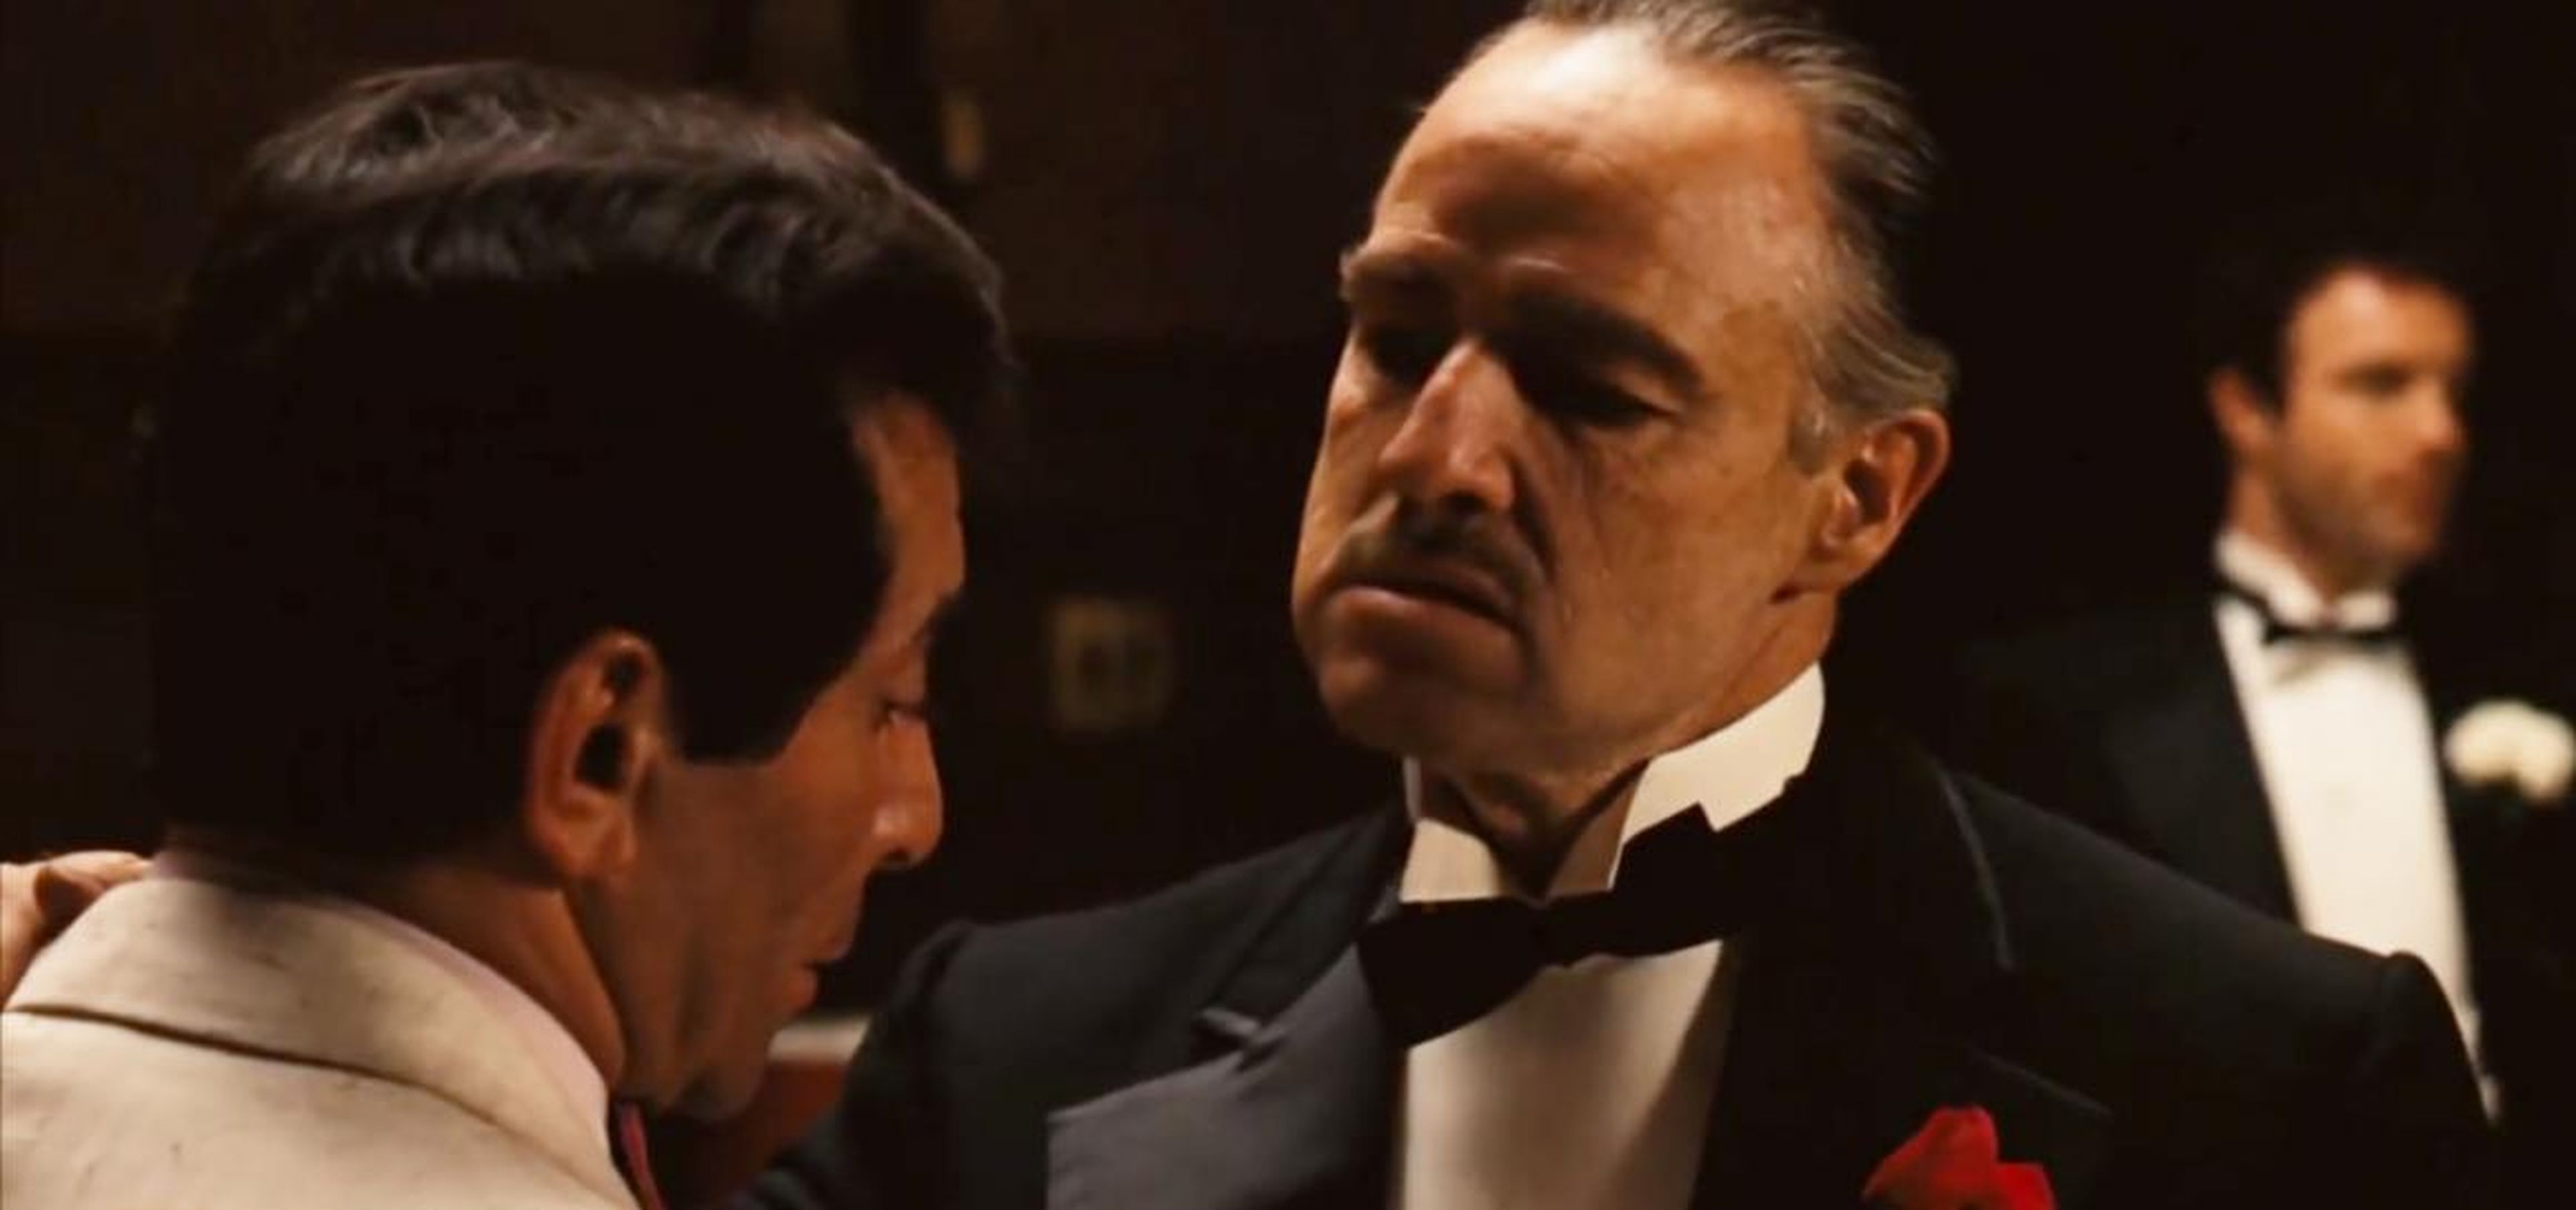 2. "The Godfather" (1972)